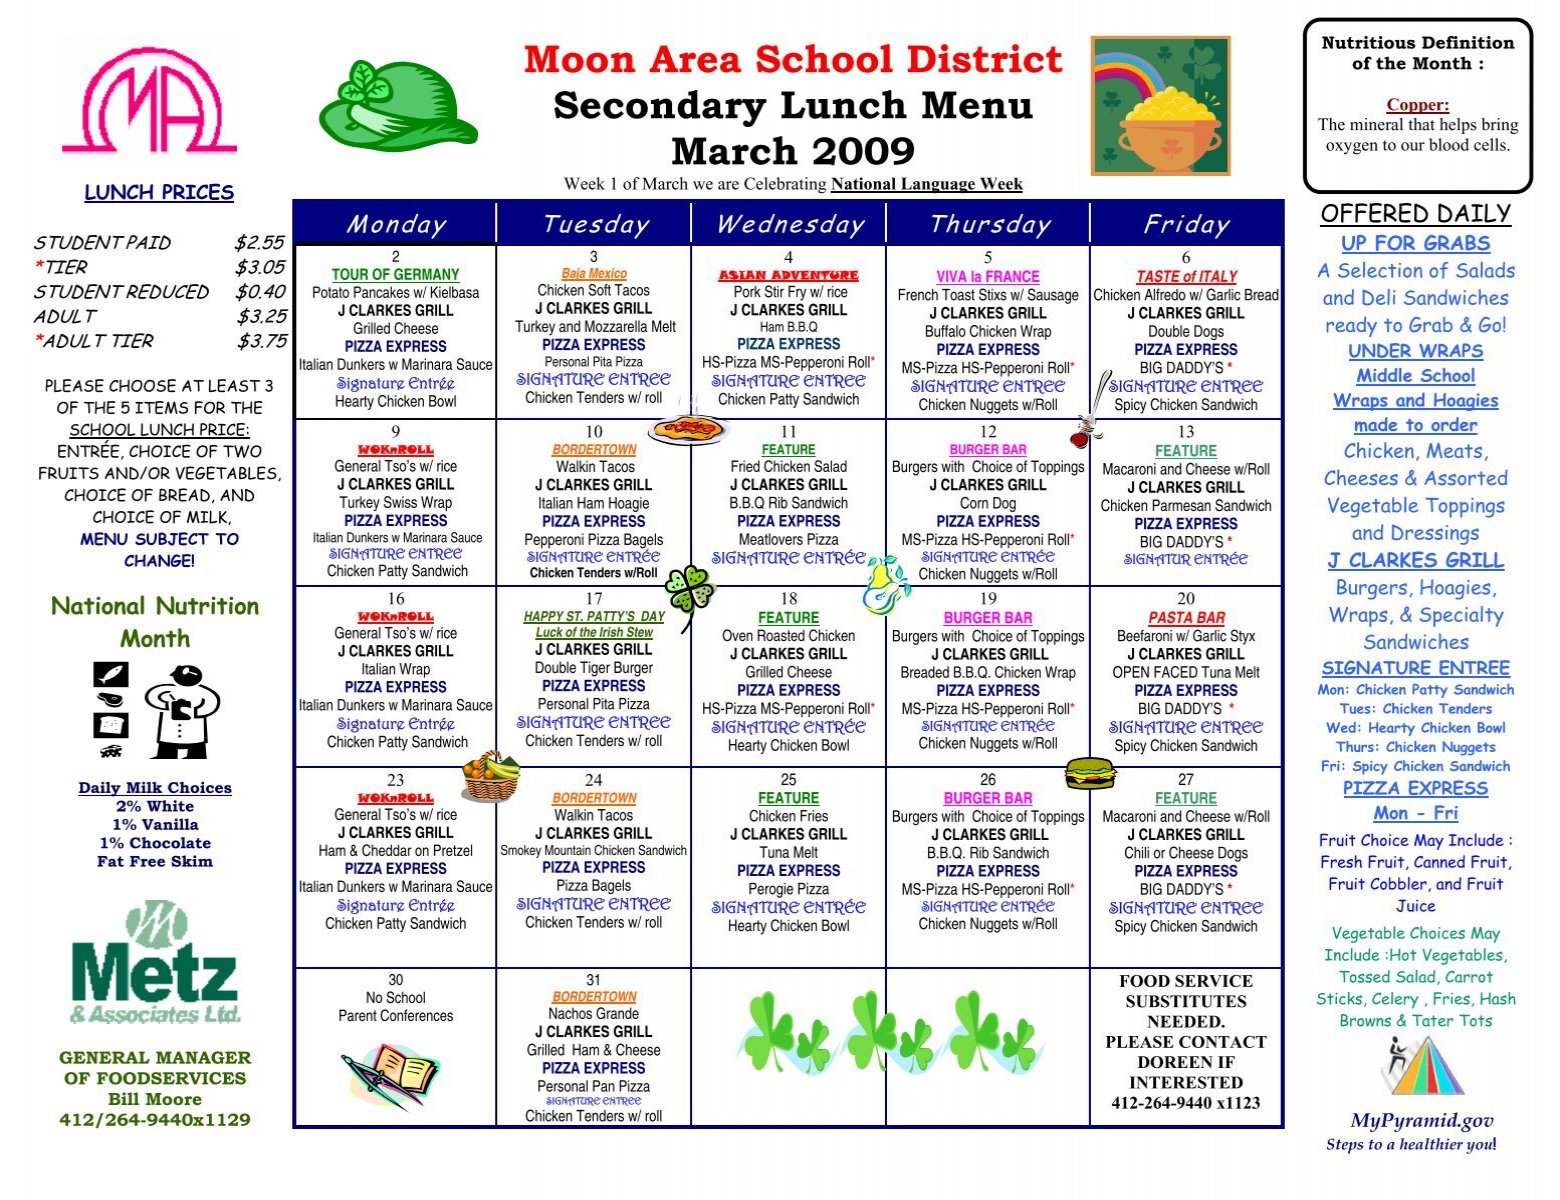 Moon Area School District Secondary Lunch Menu March 2009